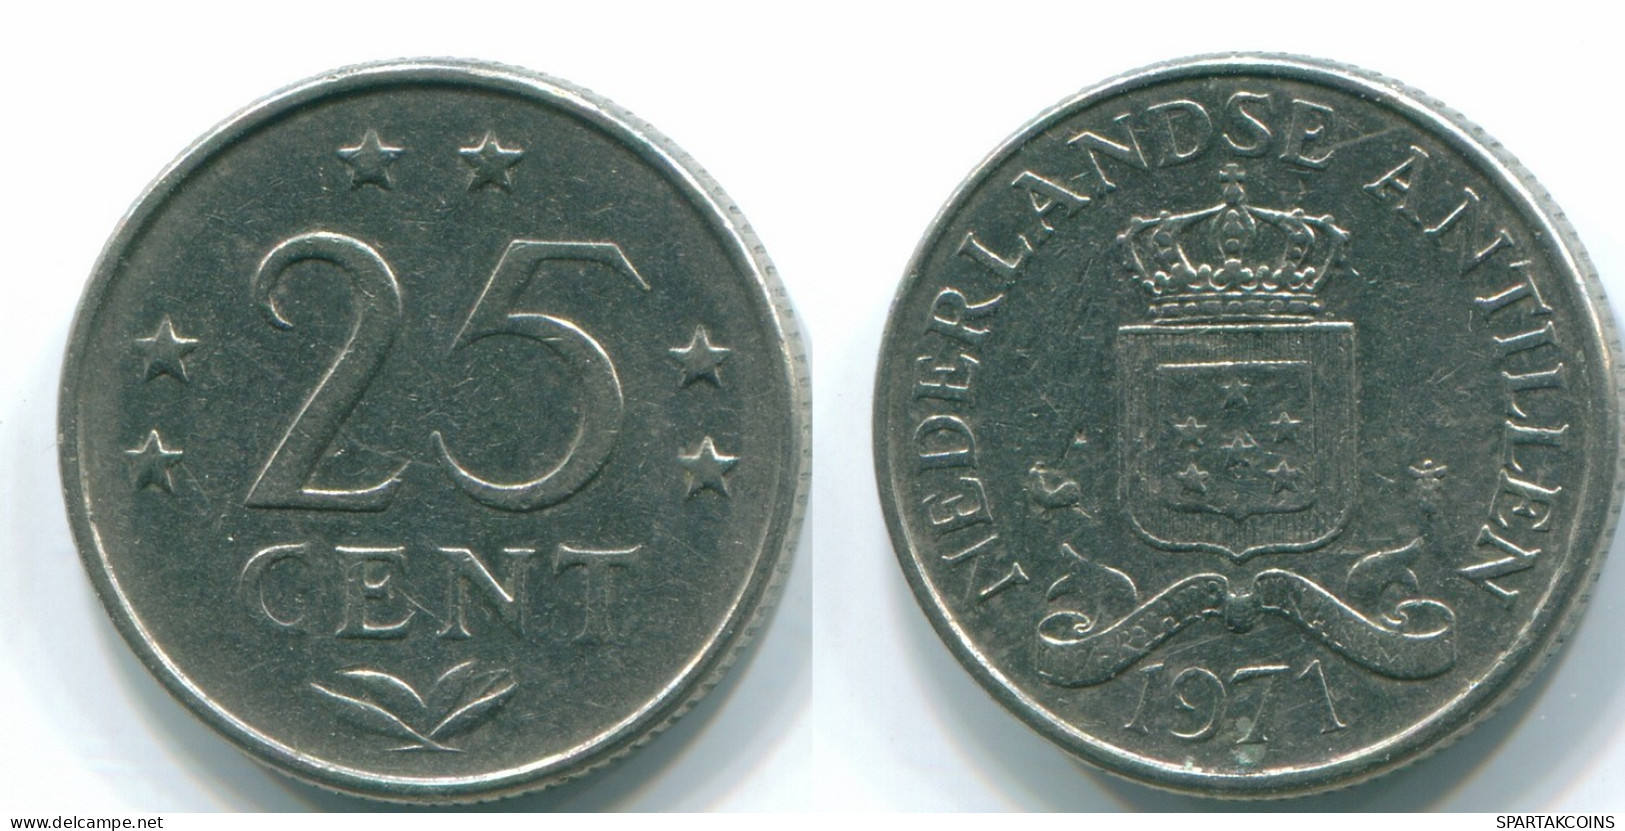 25 CENTS 1971 NETHERLANDS ANTILLES Nickel Colonial Coin #S11499.U.A - Antille Olandesi